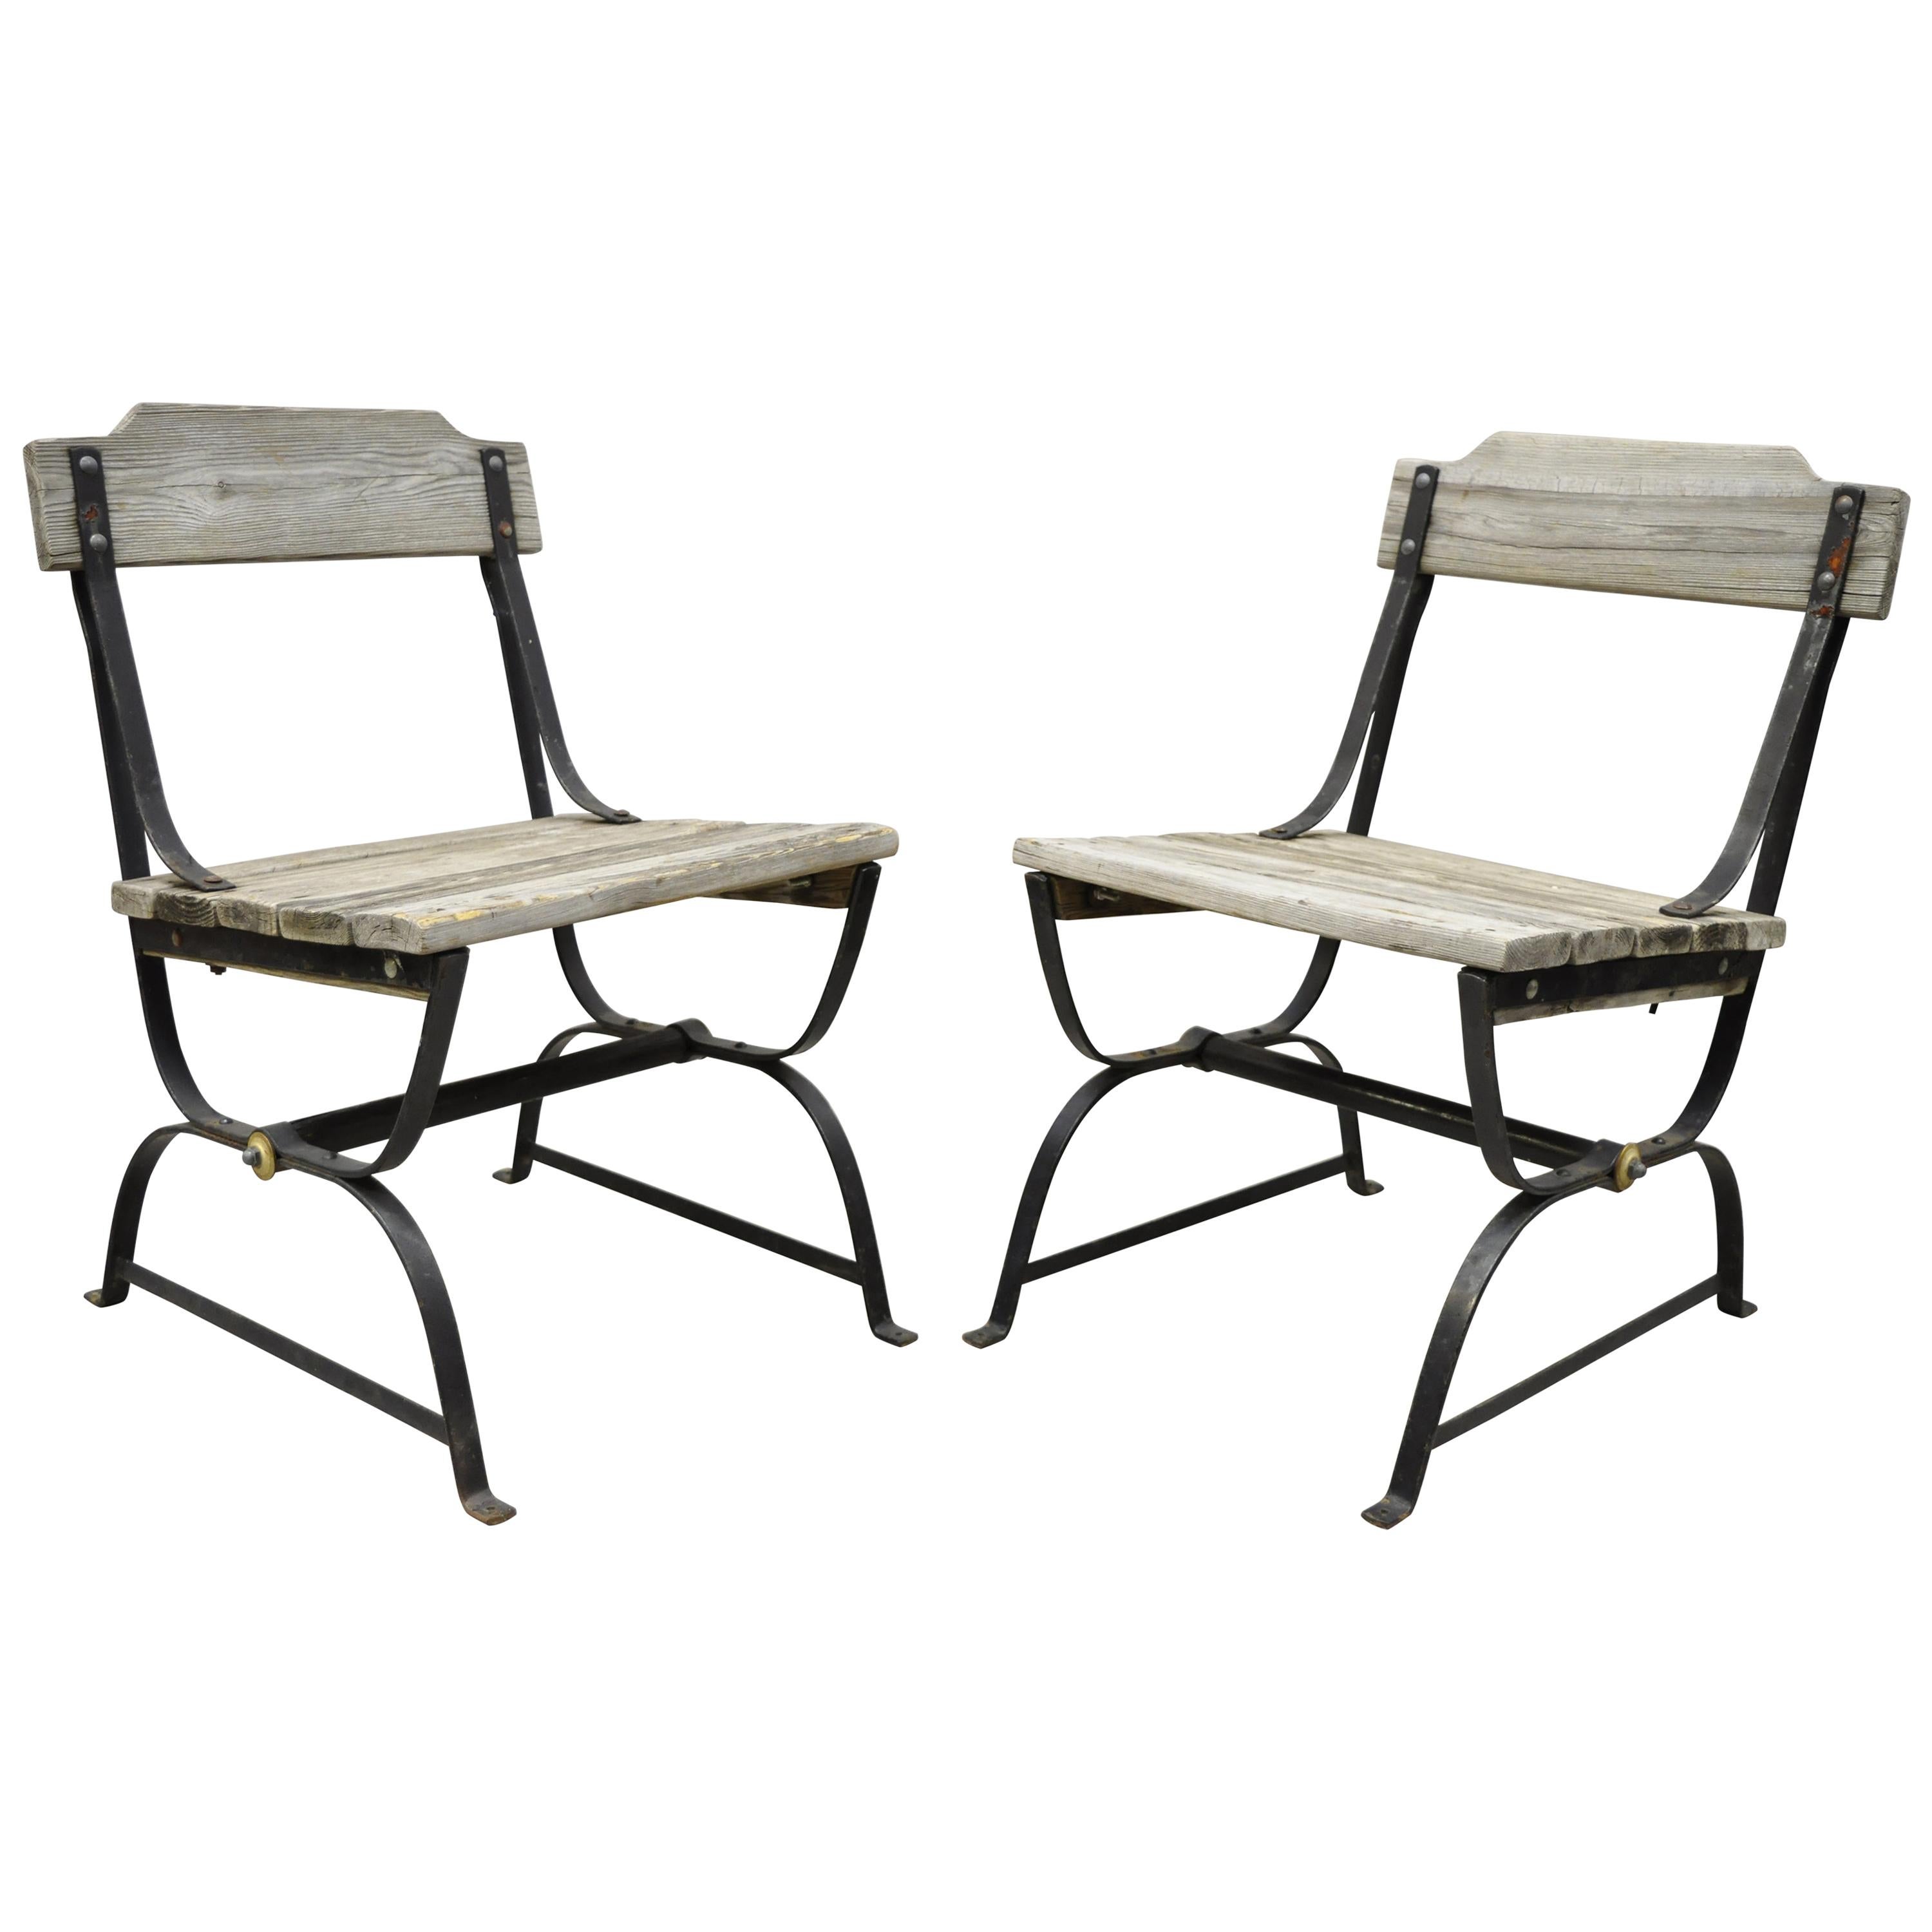 Antique French Industrial Wrought Iron Wooden Slat Seat Side Chairs, a Pair